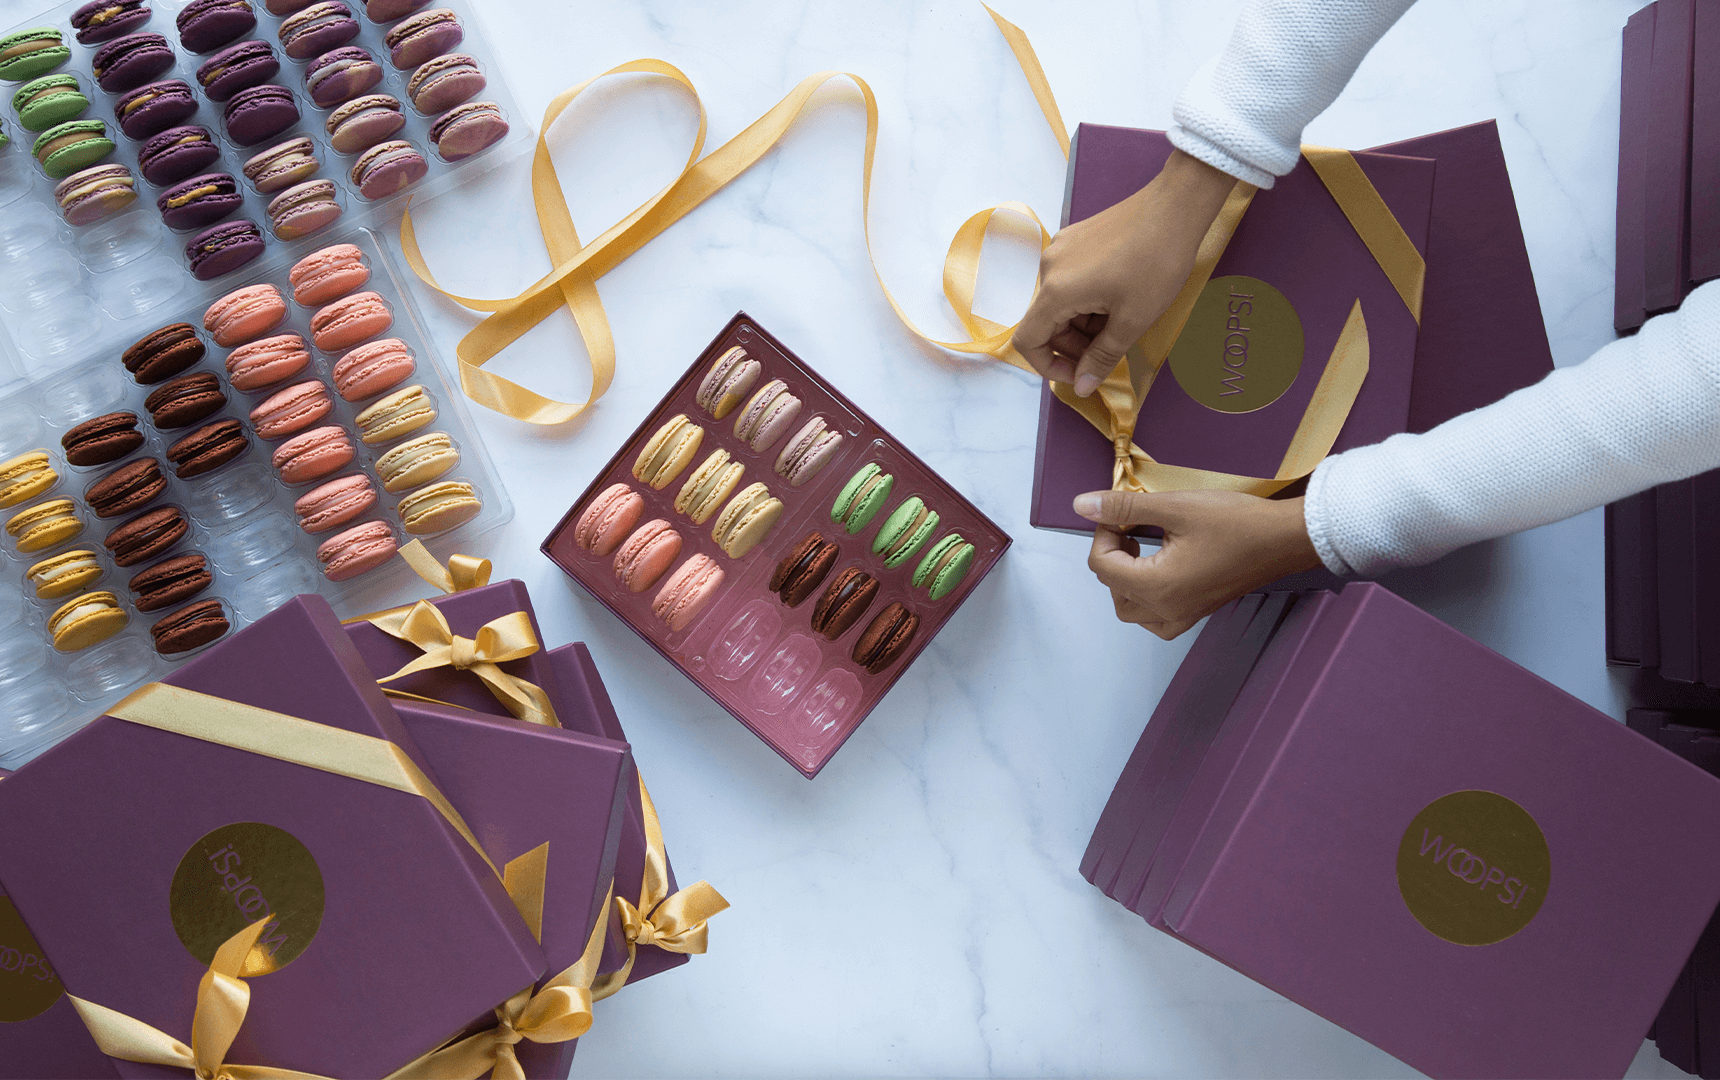 A box full of assorted French macarons is surrounded by several French macaron boxes with Holiday sleeves